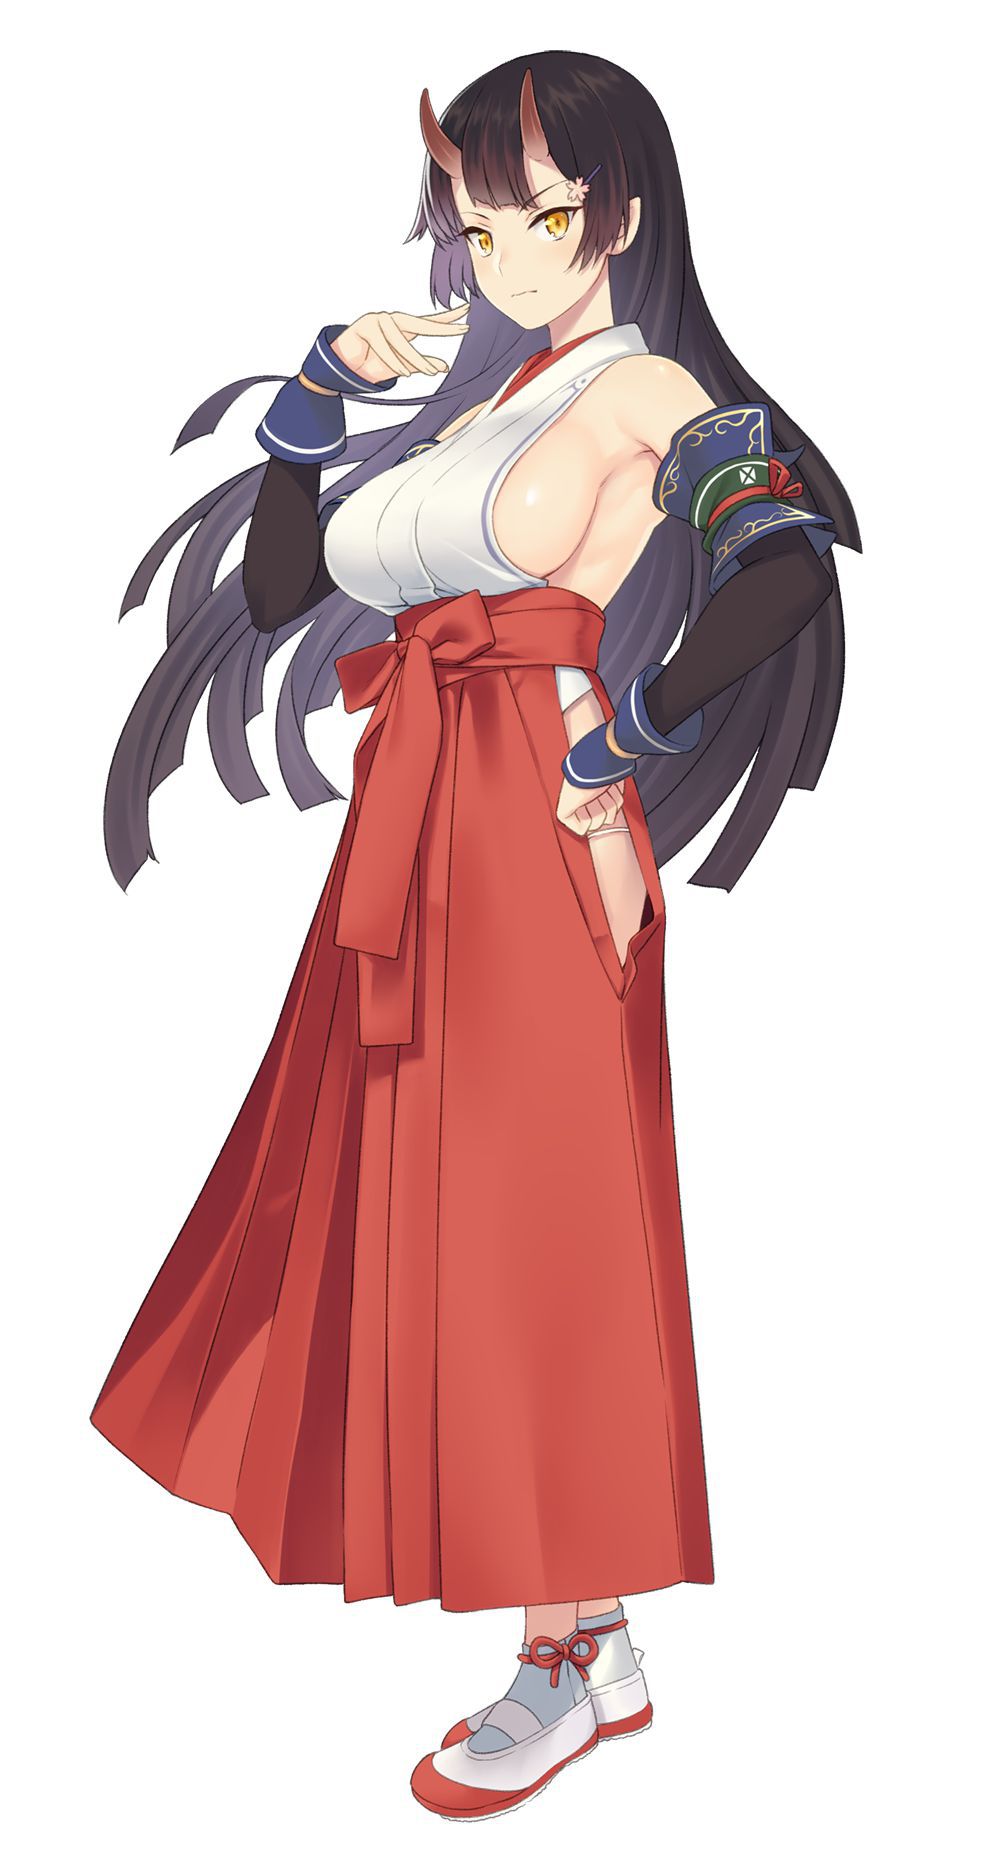 You want to see images of shrine maidens, right? 19